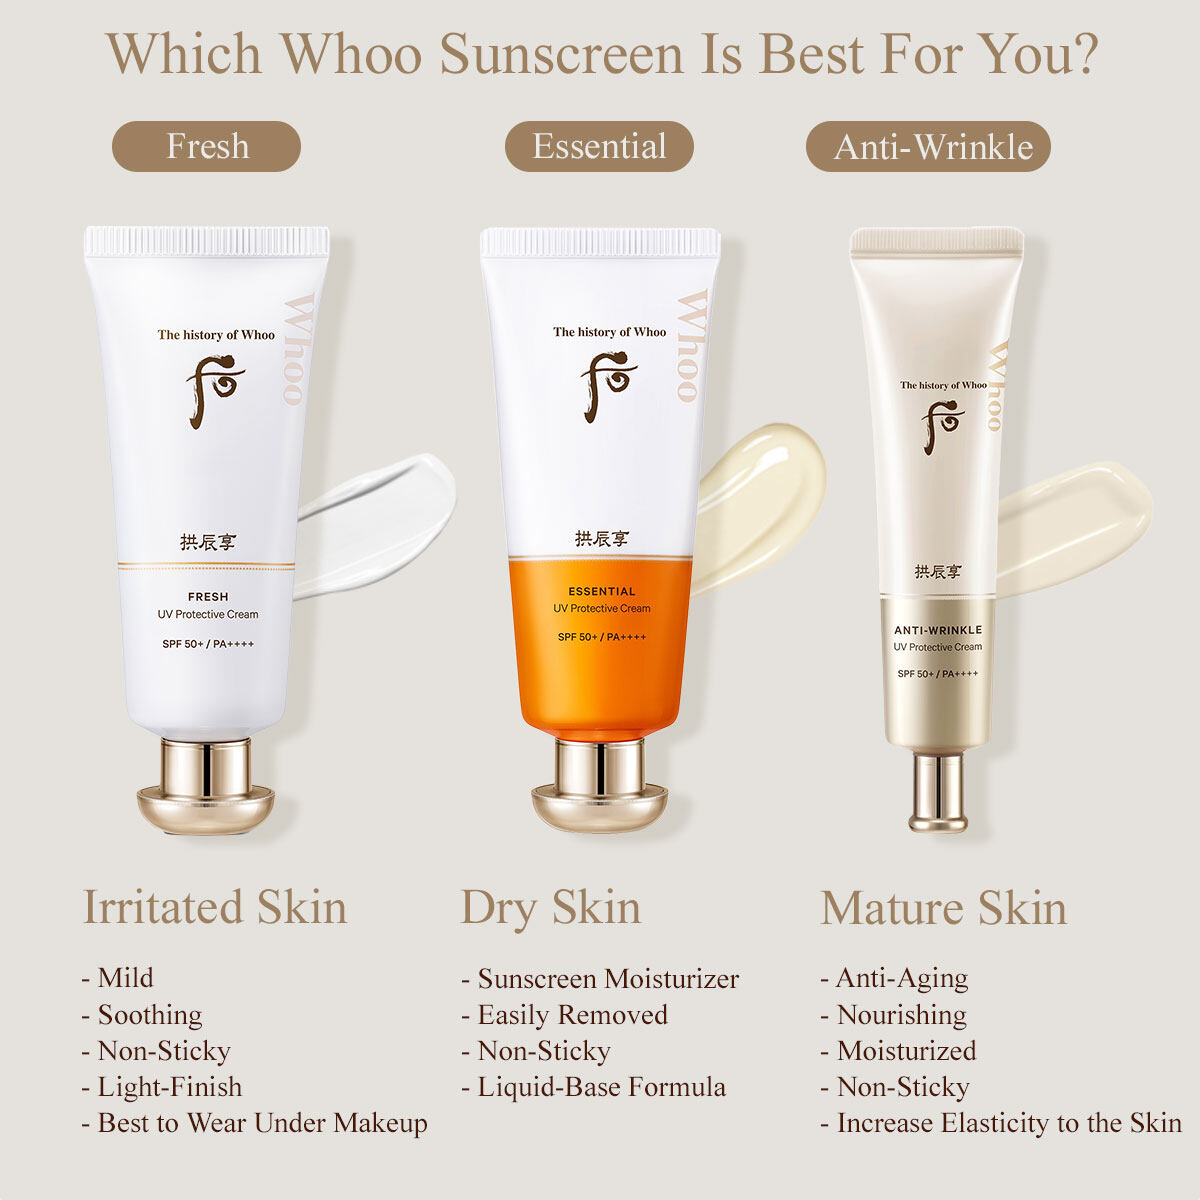 [The history of Whoo] Gongjinhyang Jinhaeyoon UV Protective Cream Special Set SPF50/PA+++ Anti-aging